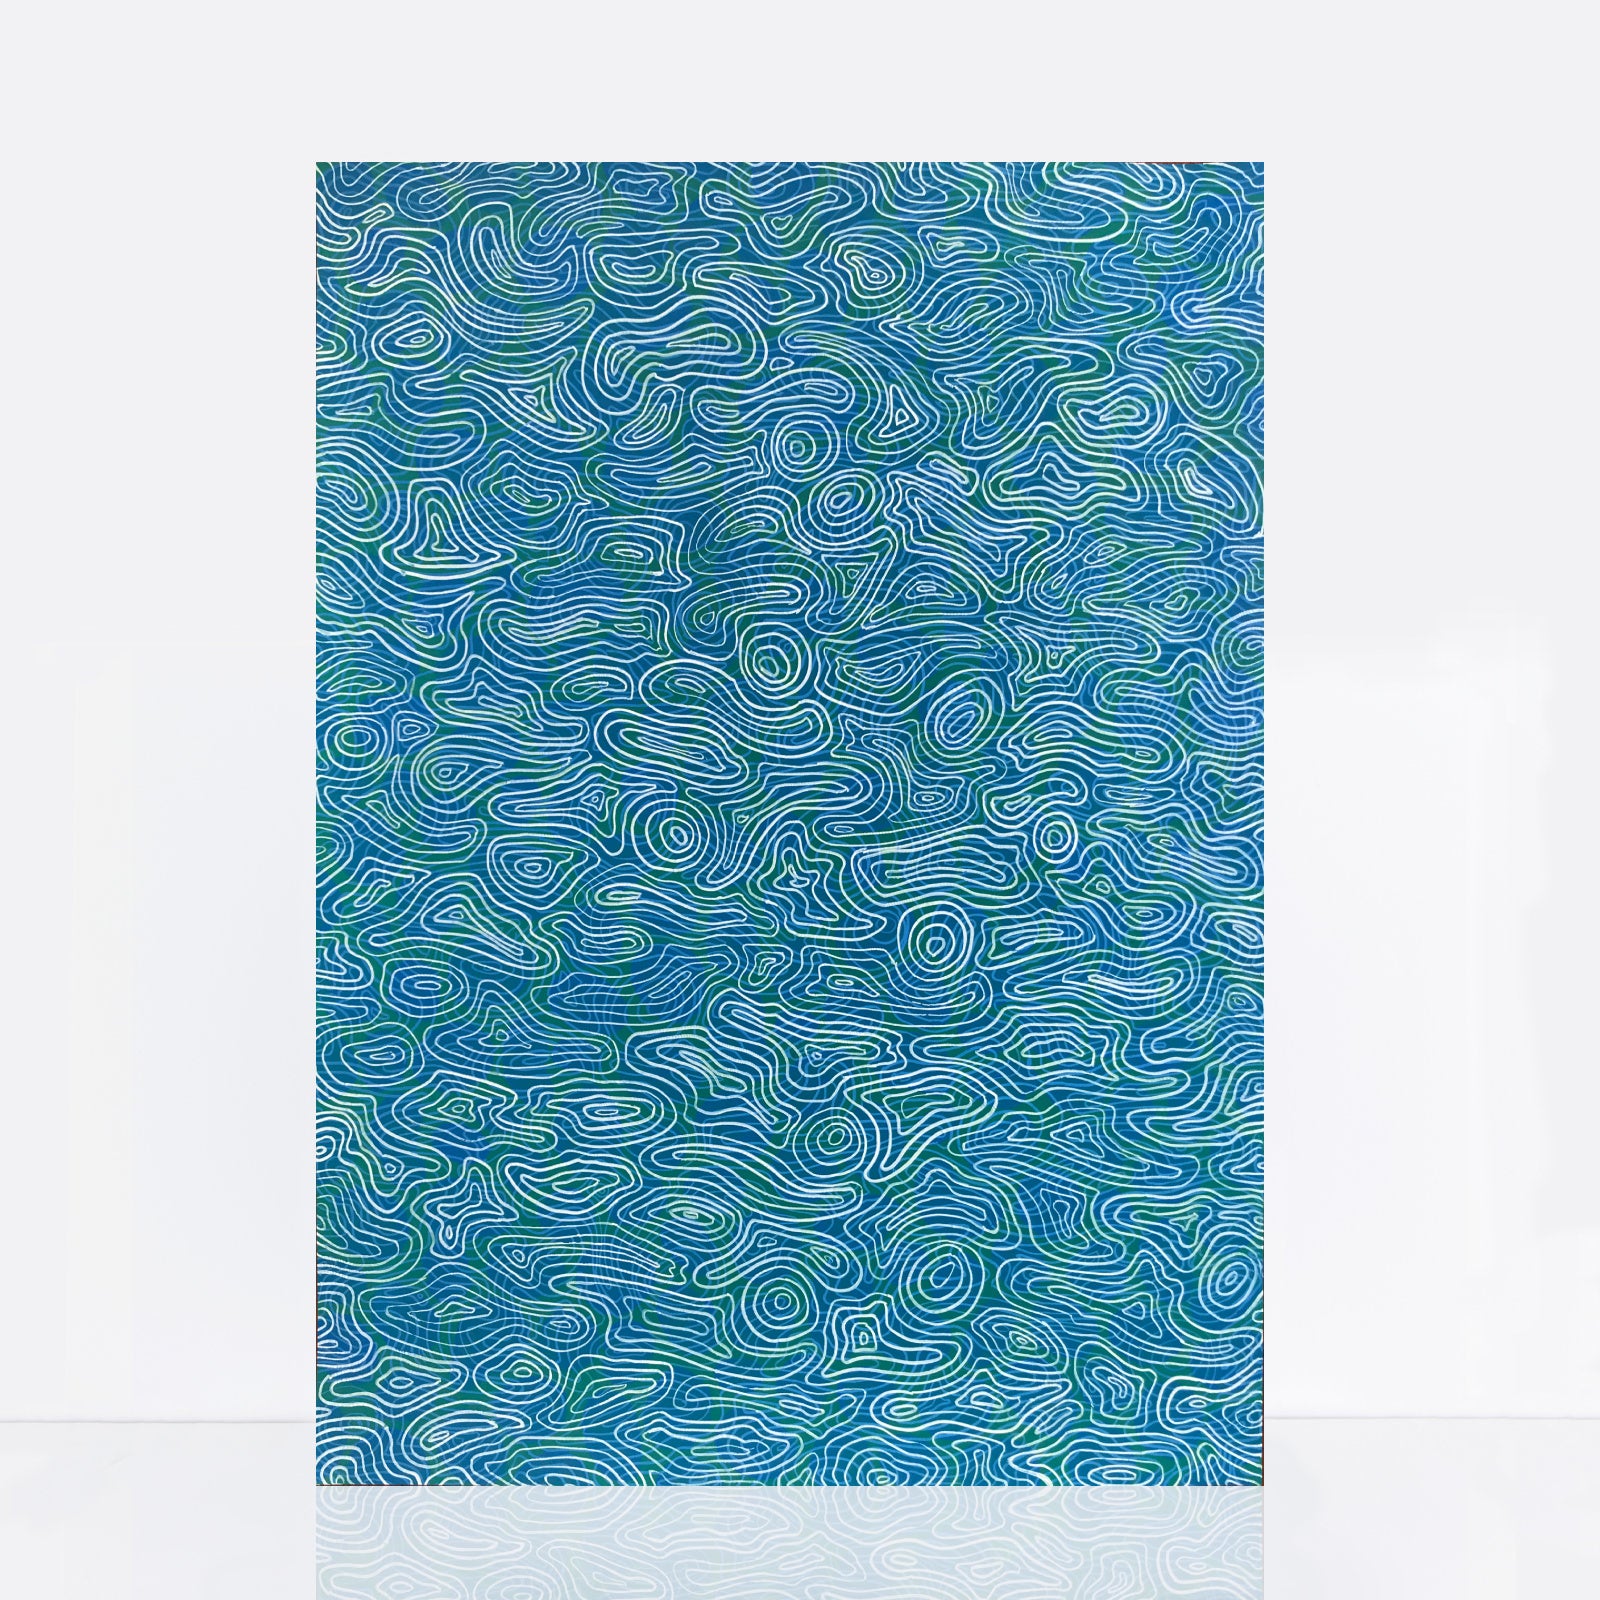 acrylic painting on paper of water ripples